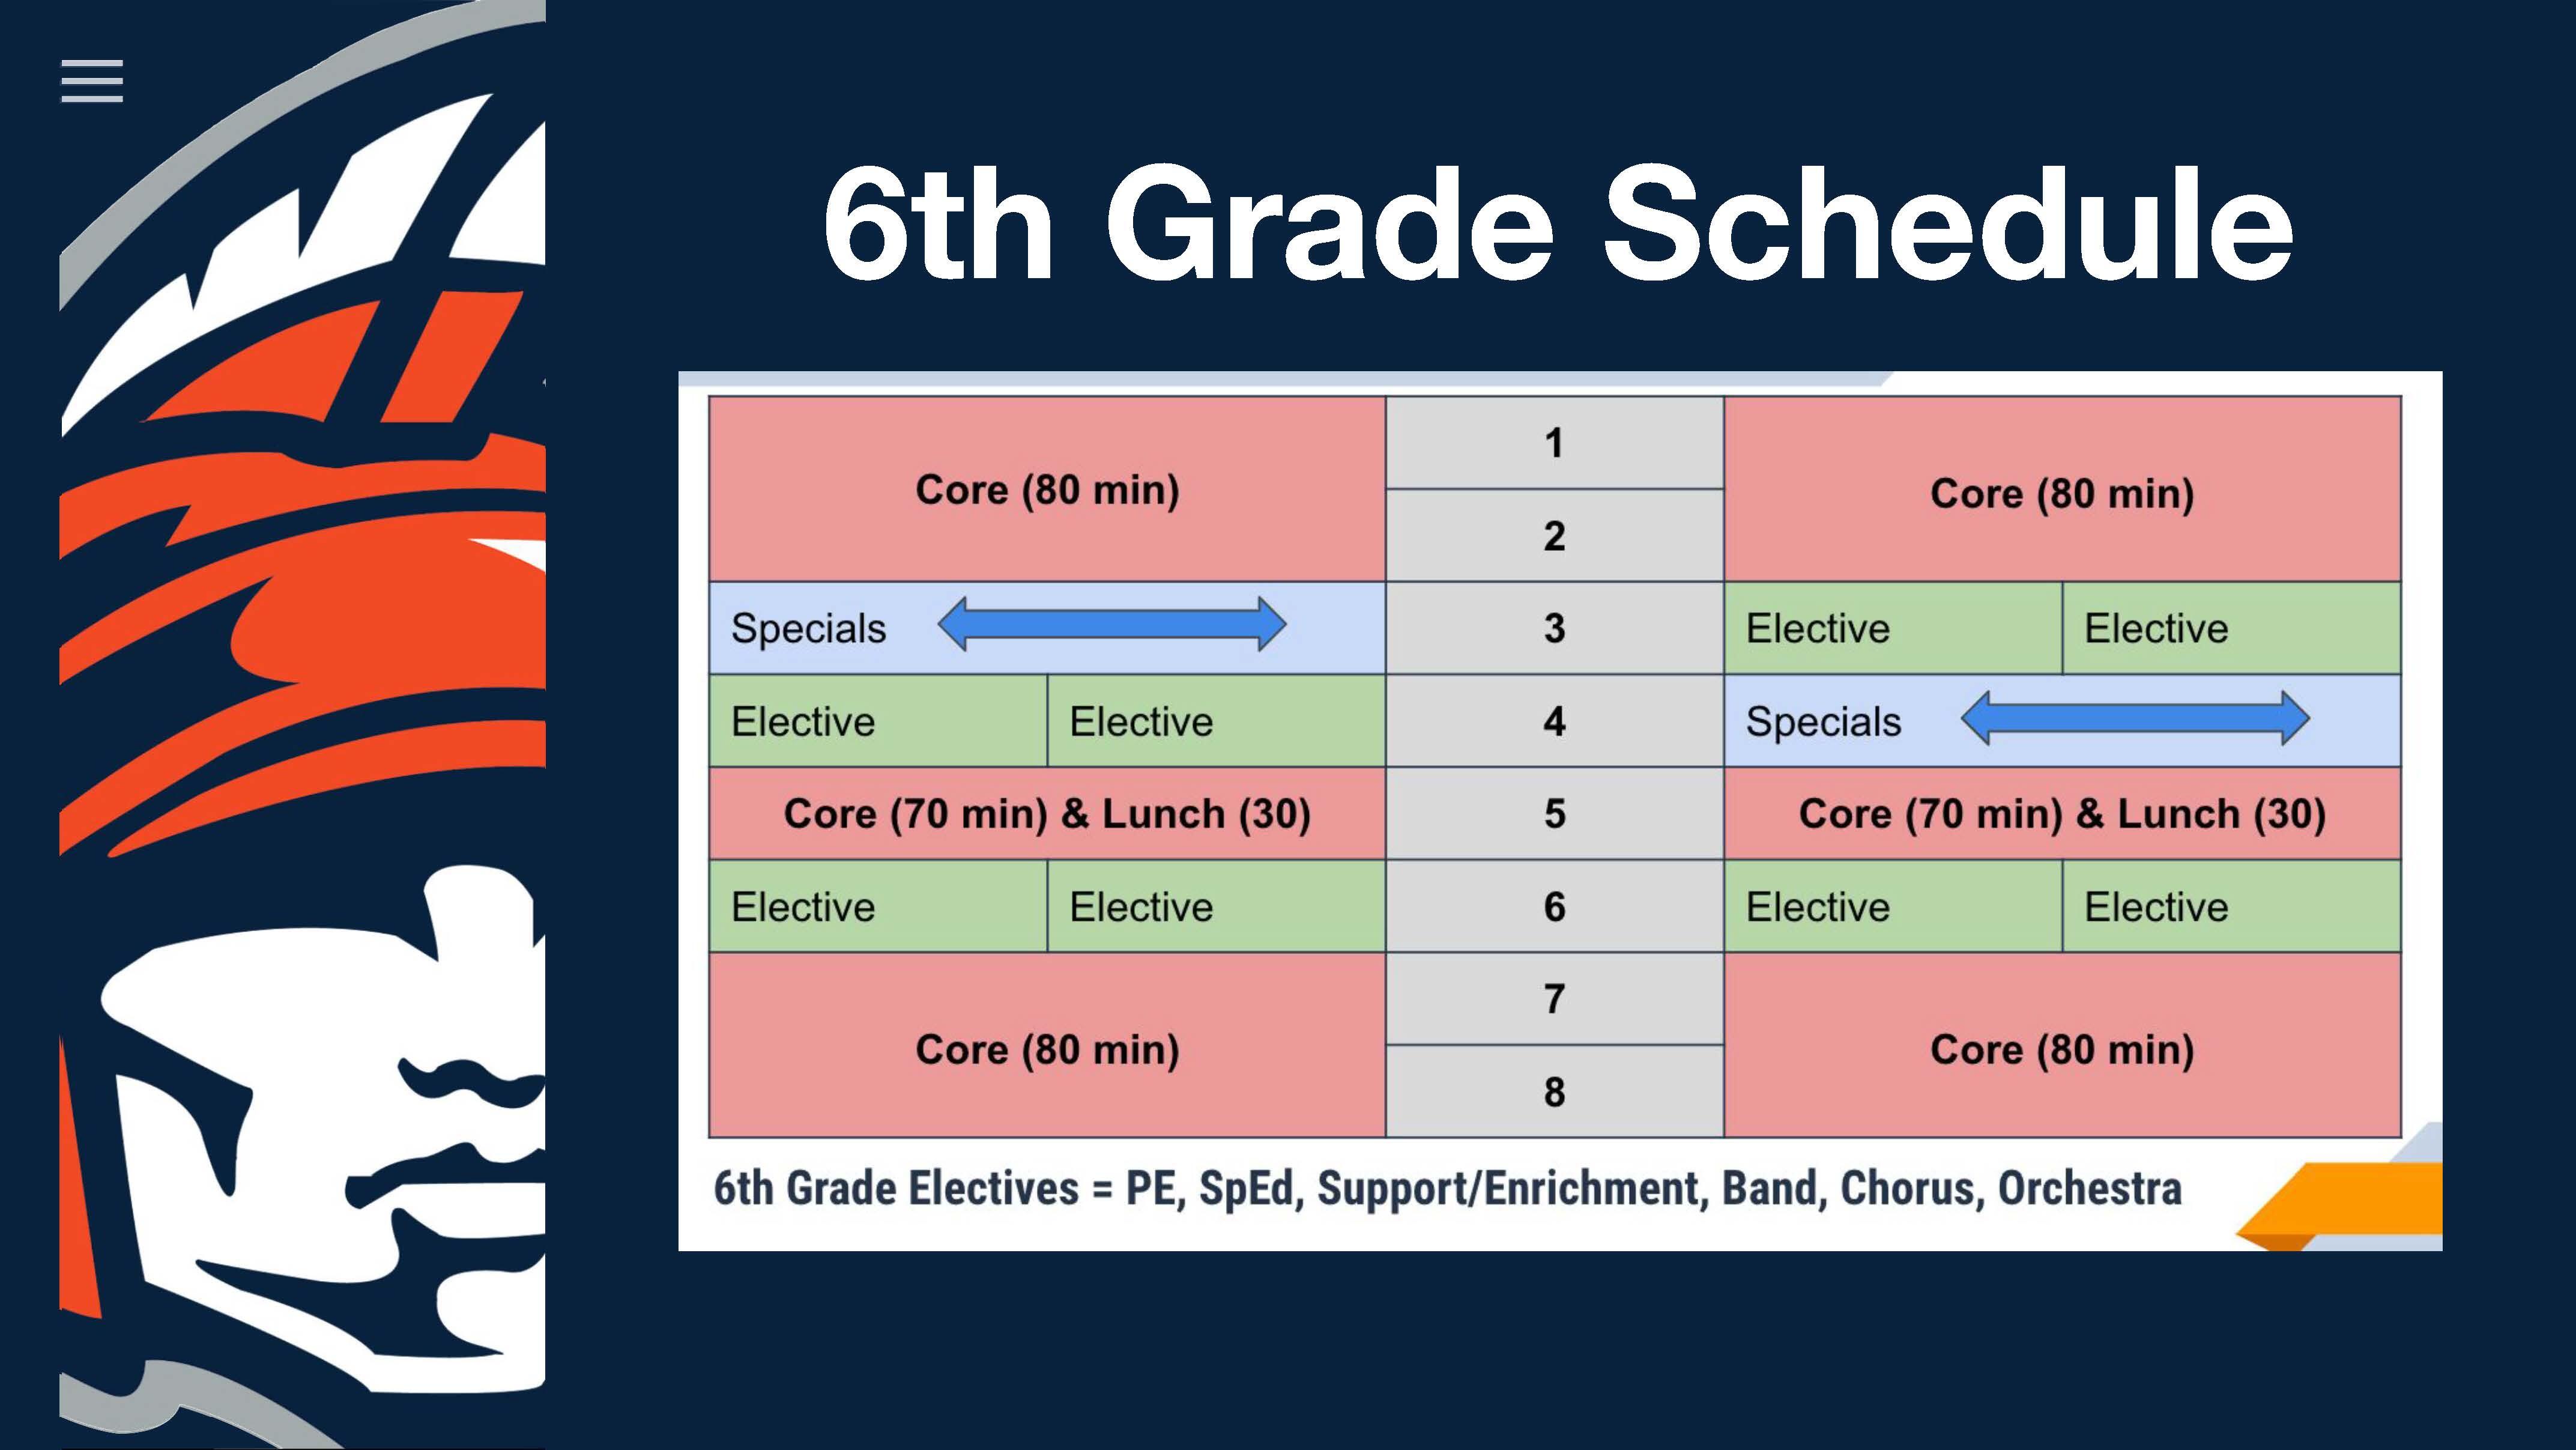 6th Grade Schedule for 2022-2023